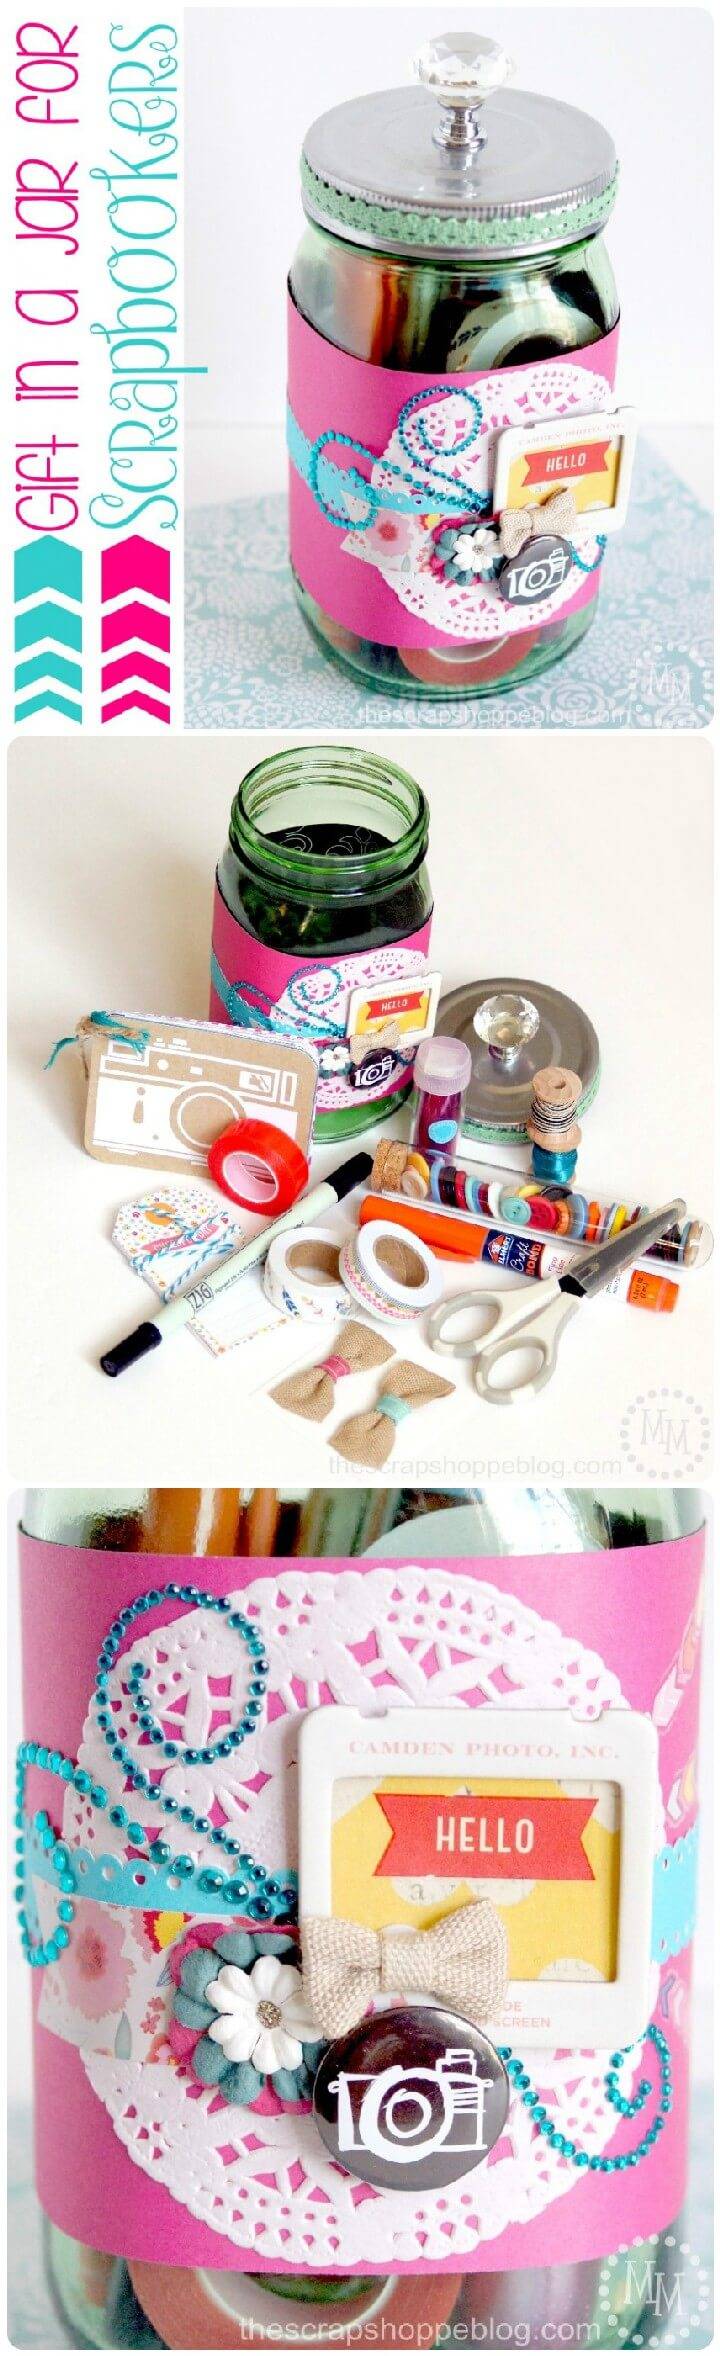 DIY Gift in a Mason Jar for Scrapbookers